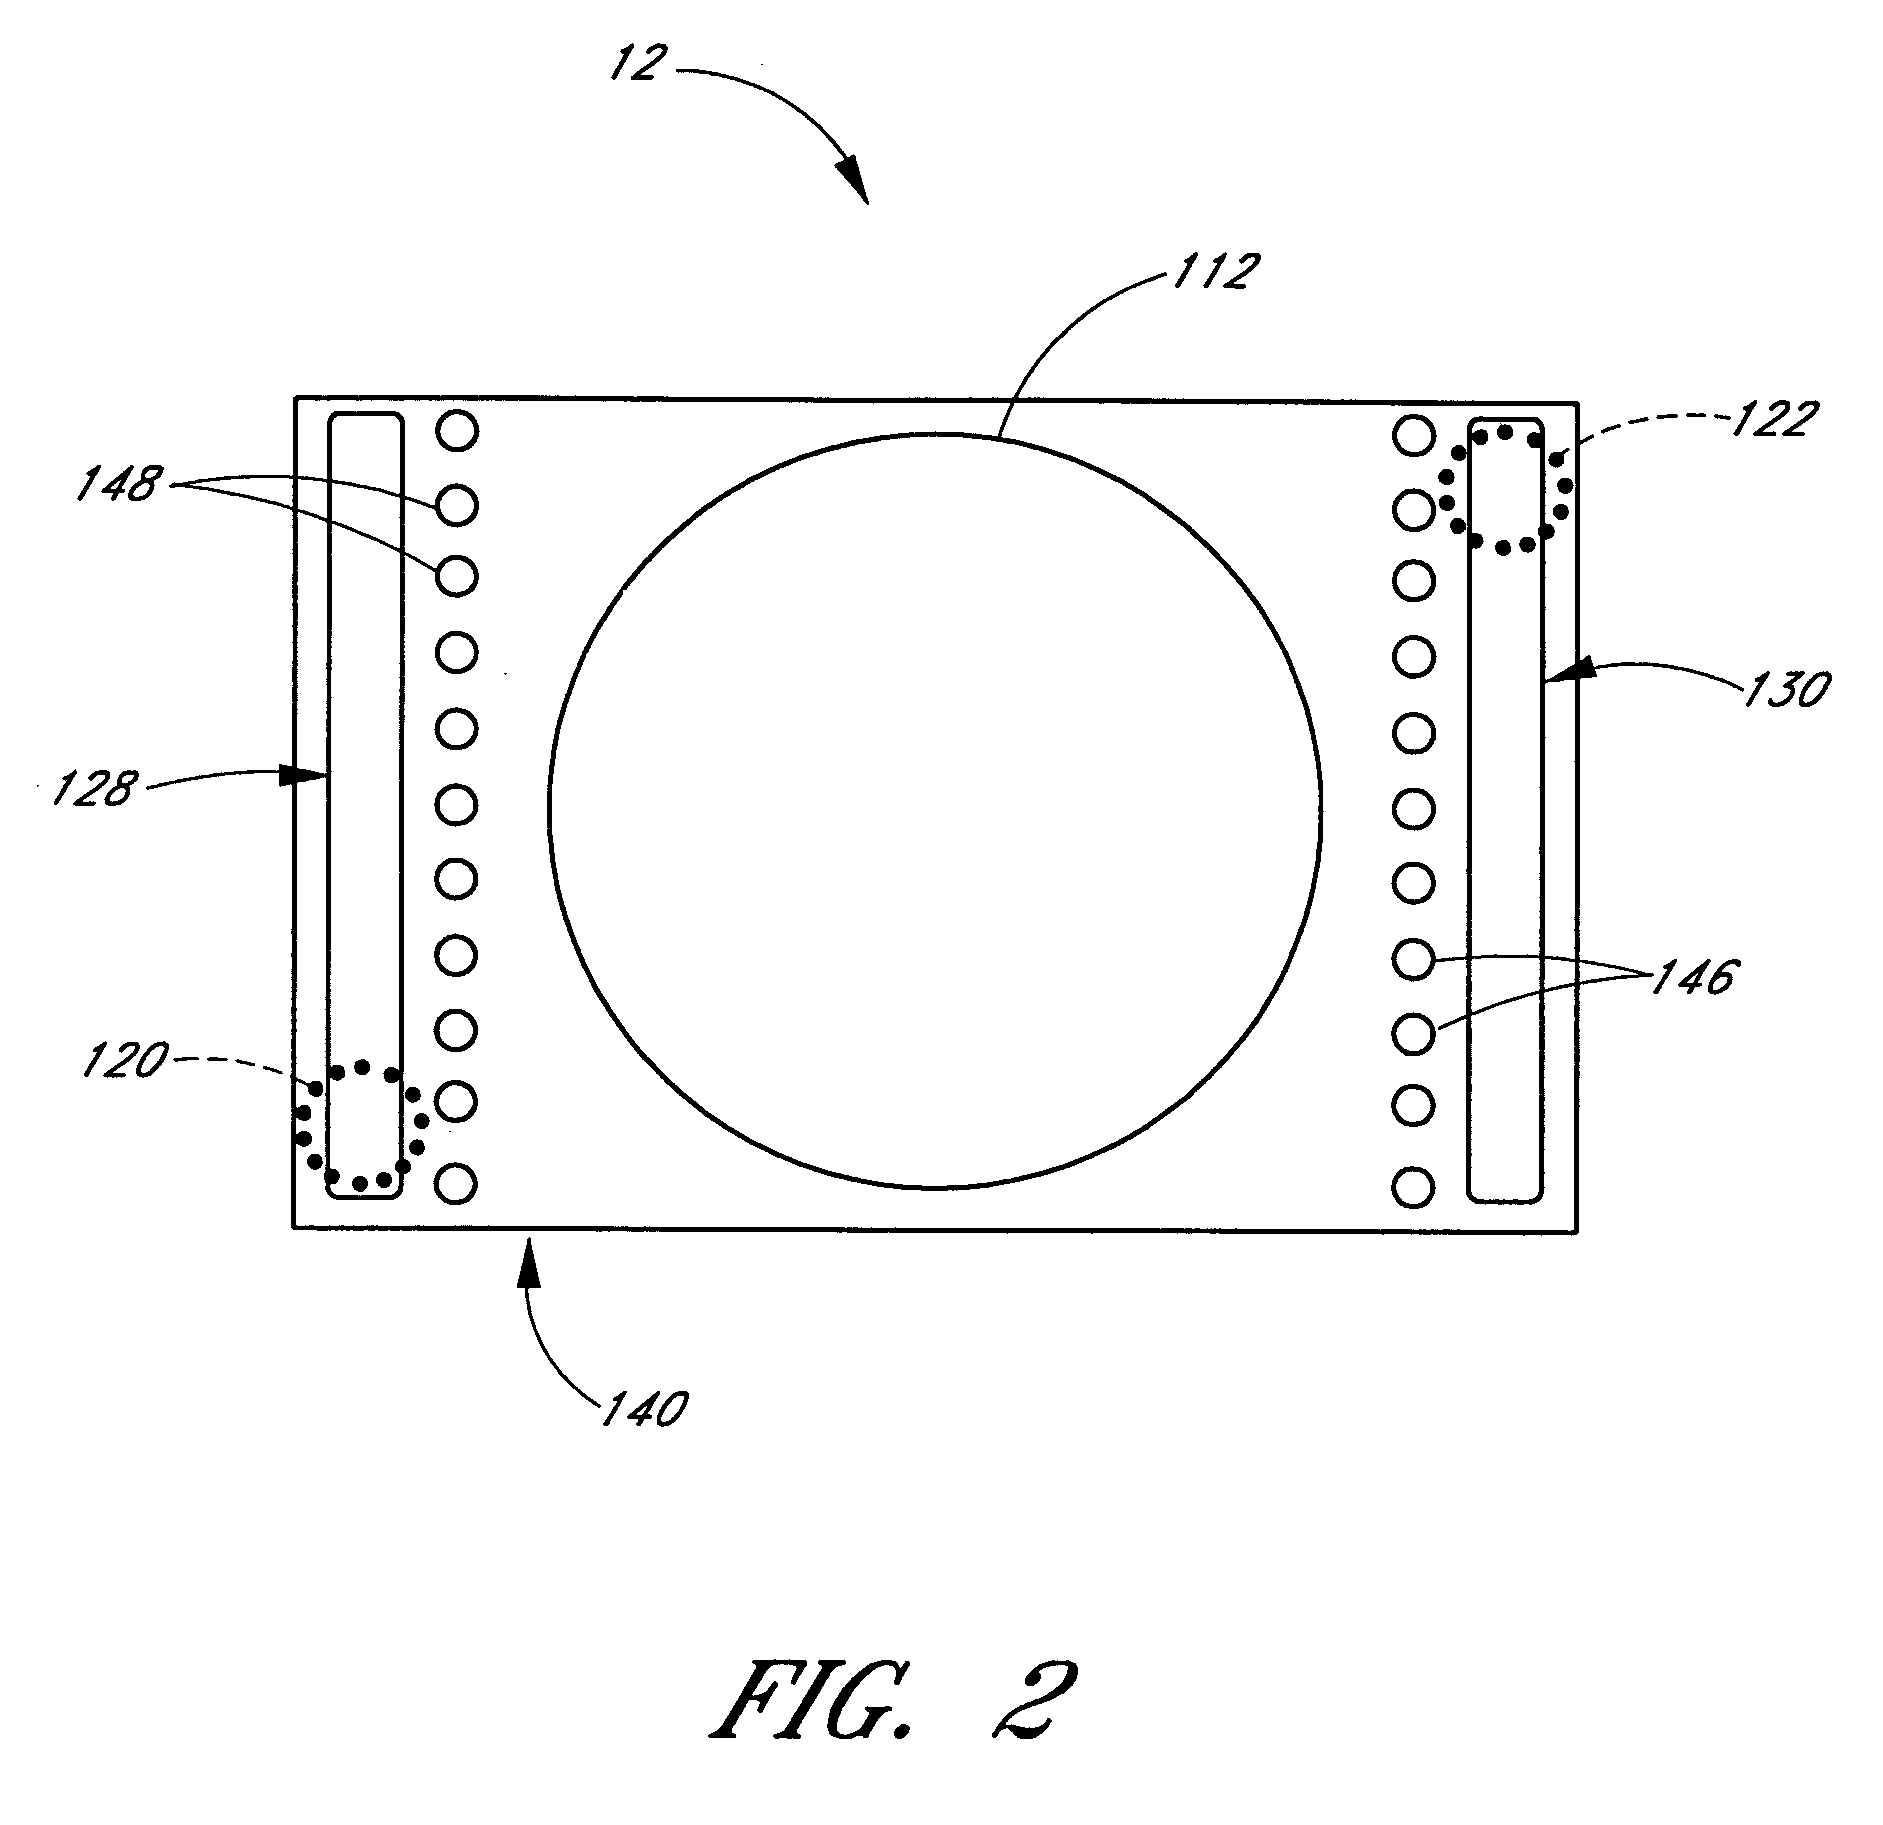 Reaction system for growing a thin film